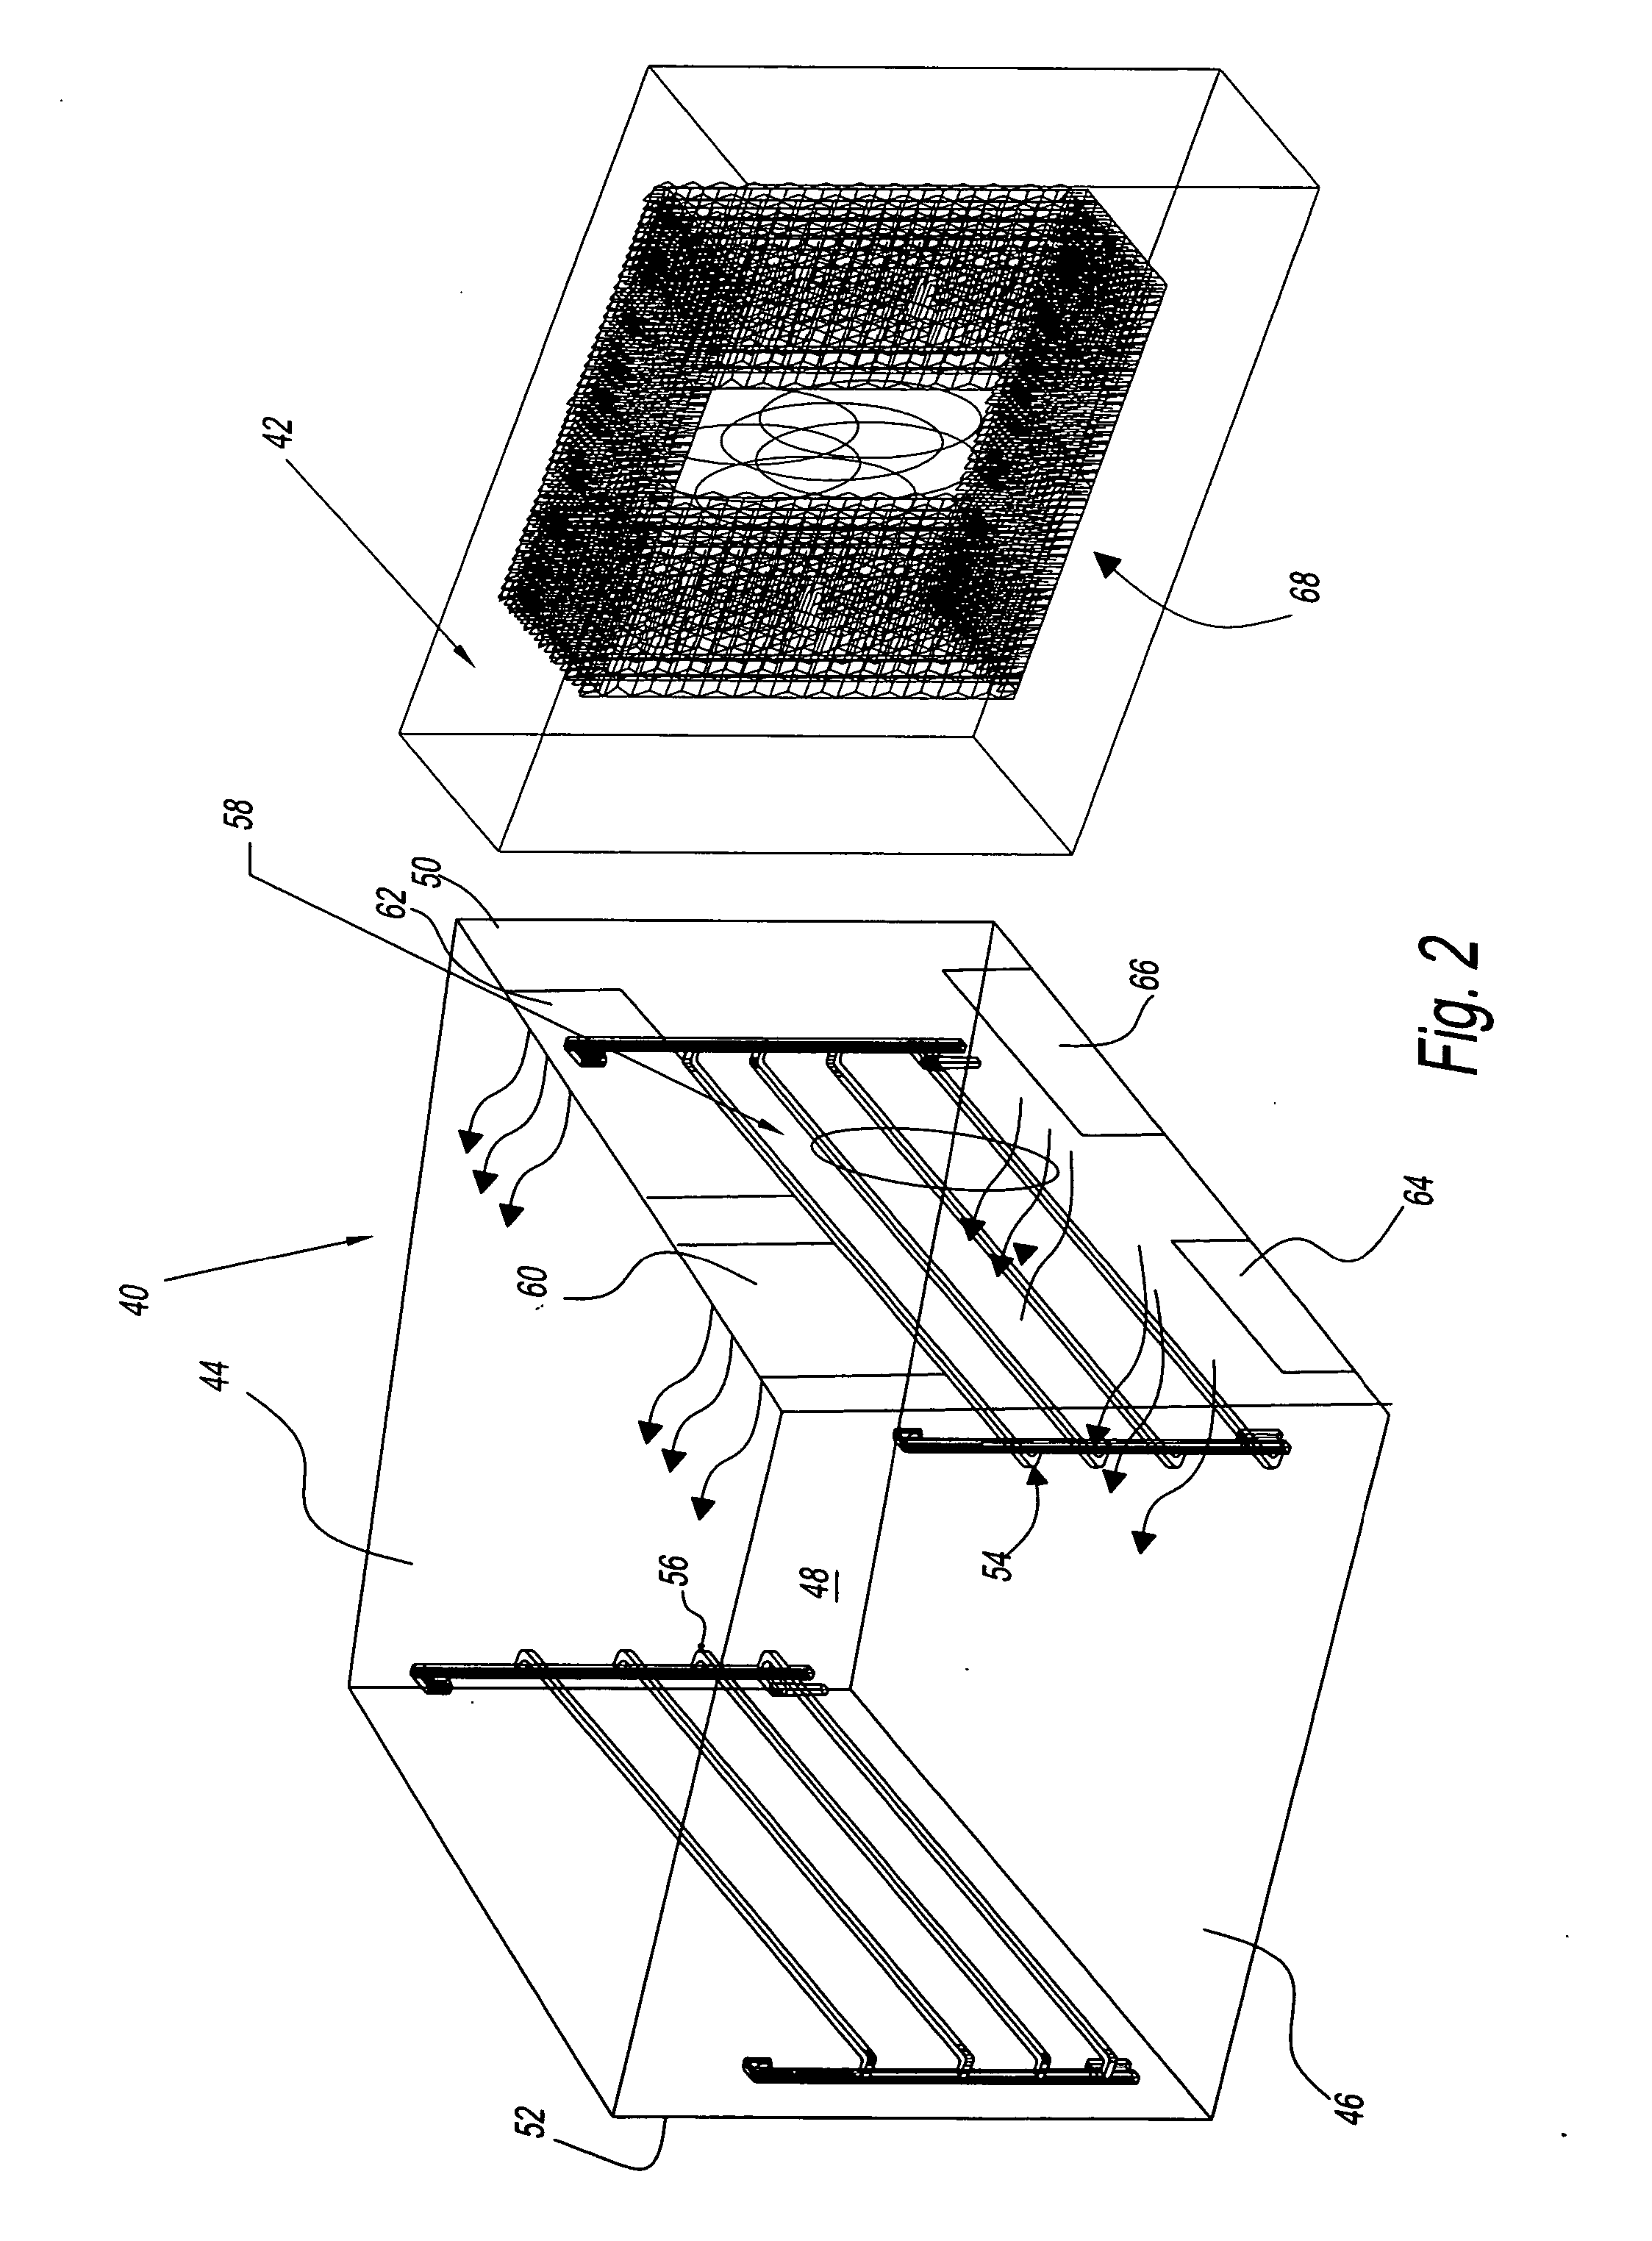 Cooking device with smoke and odor abatement